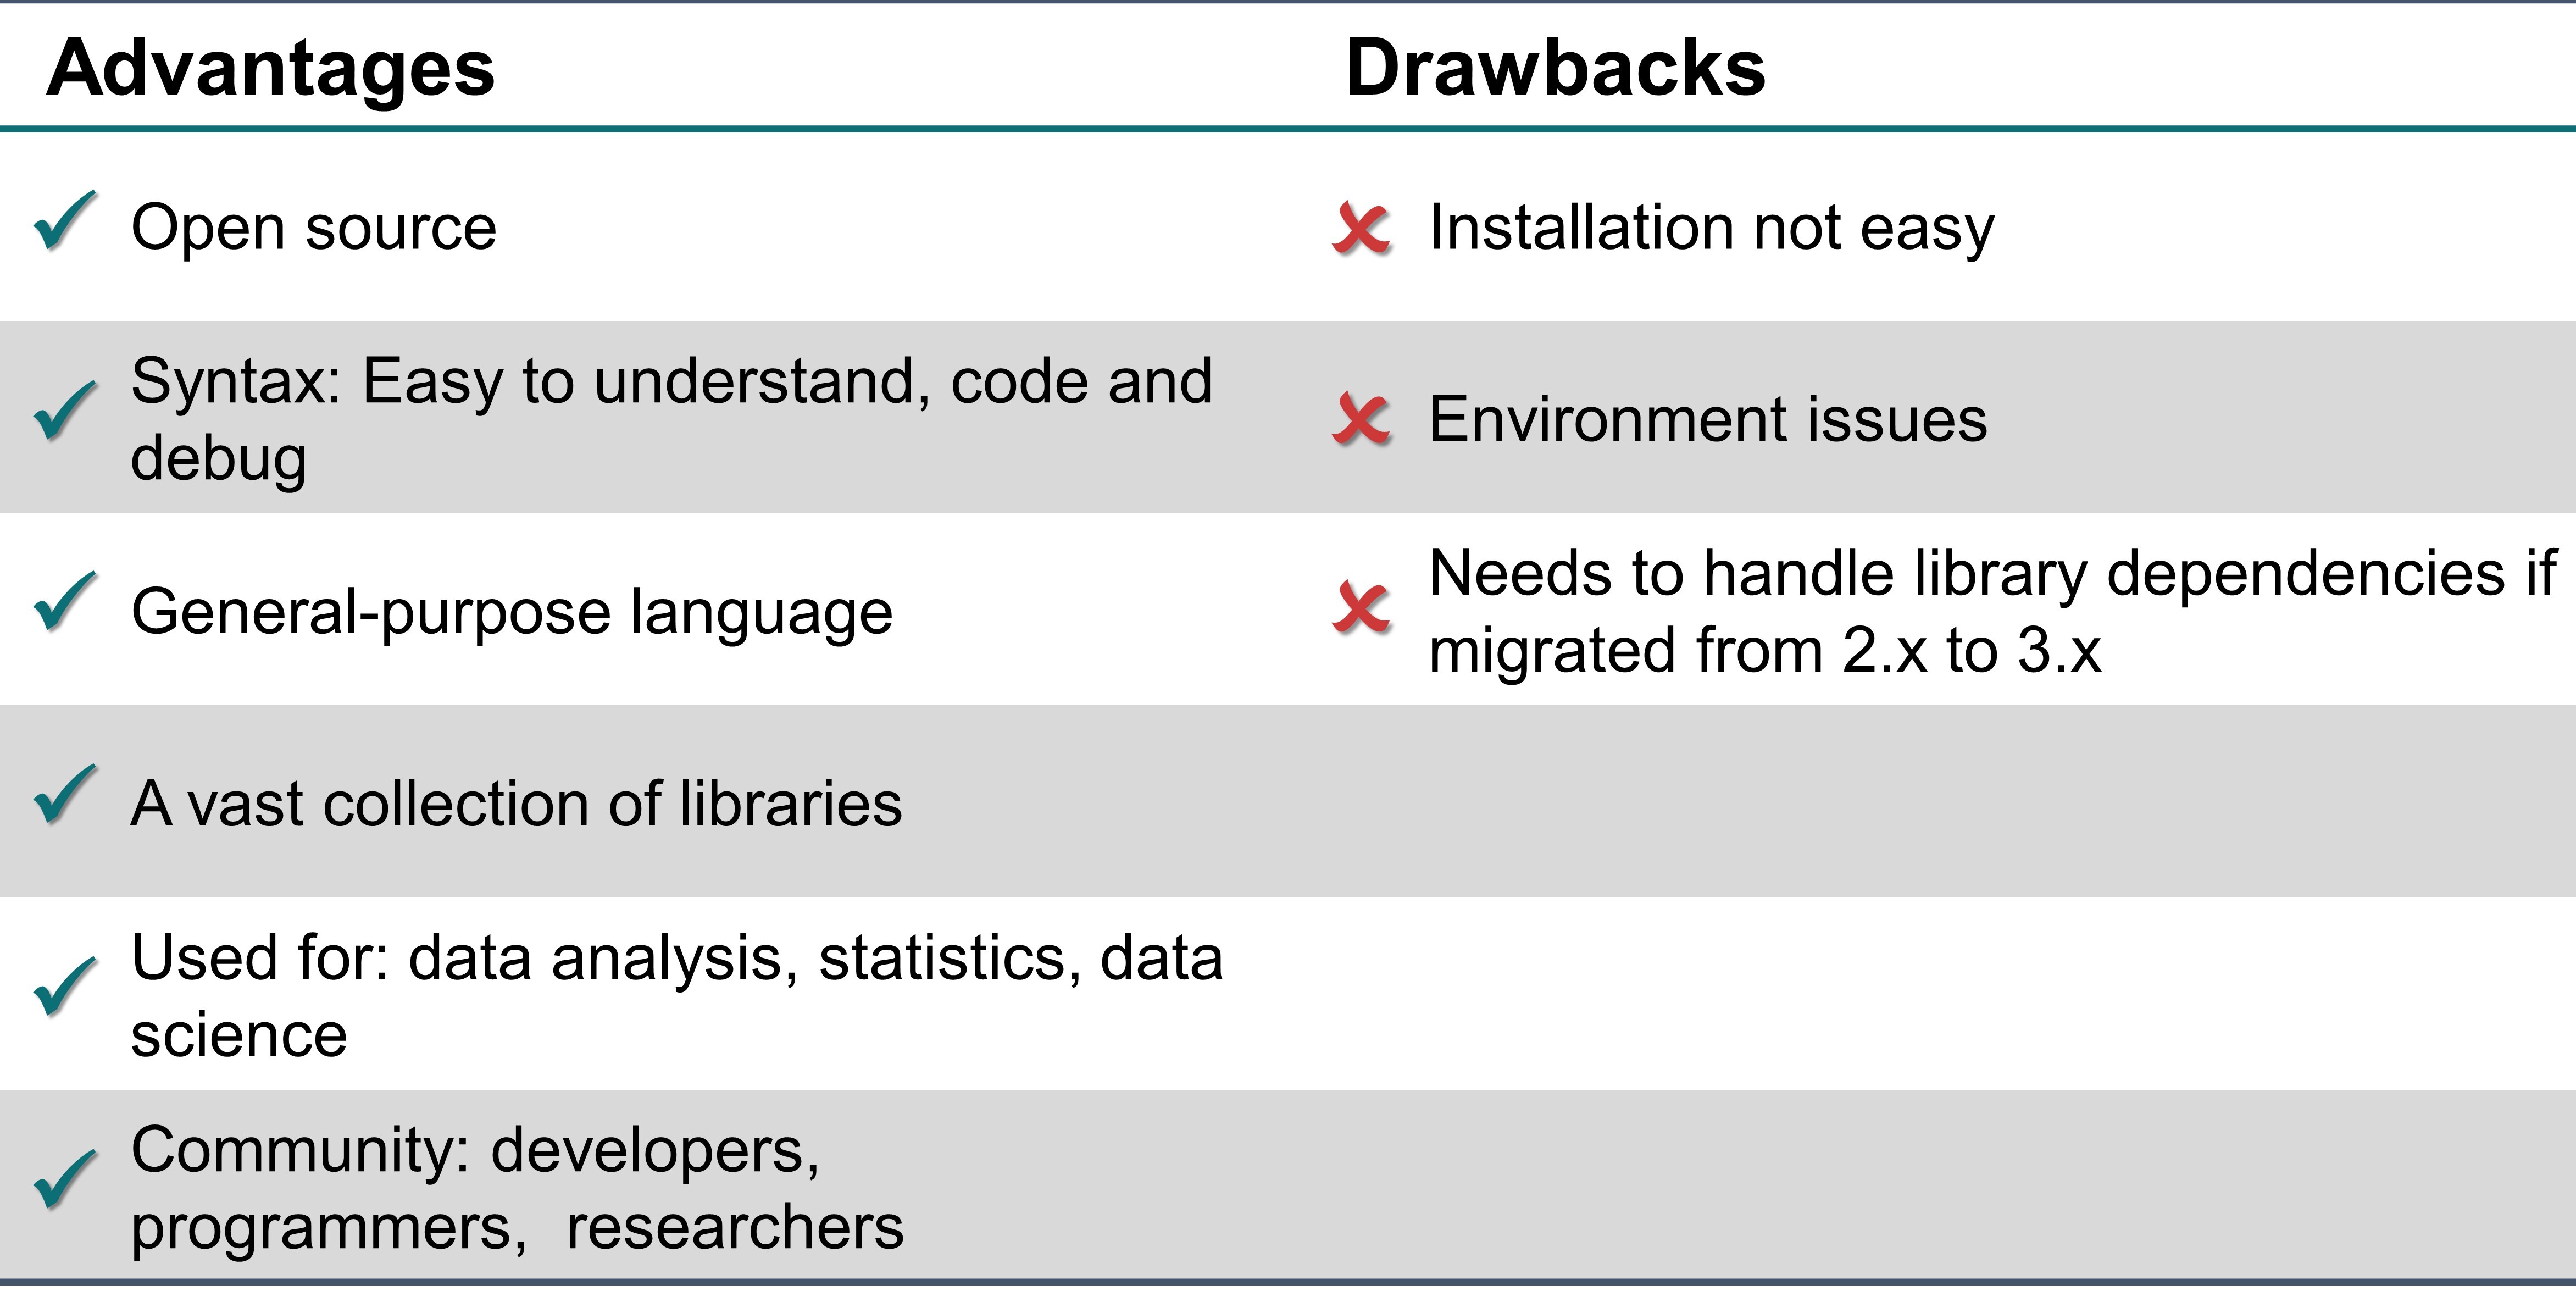 Table 6.4.2 The advantages and drawbacks of Python